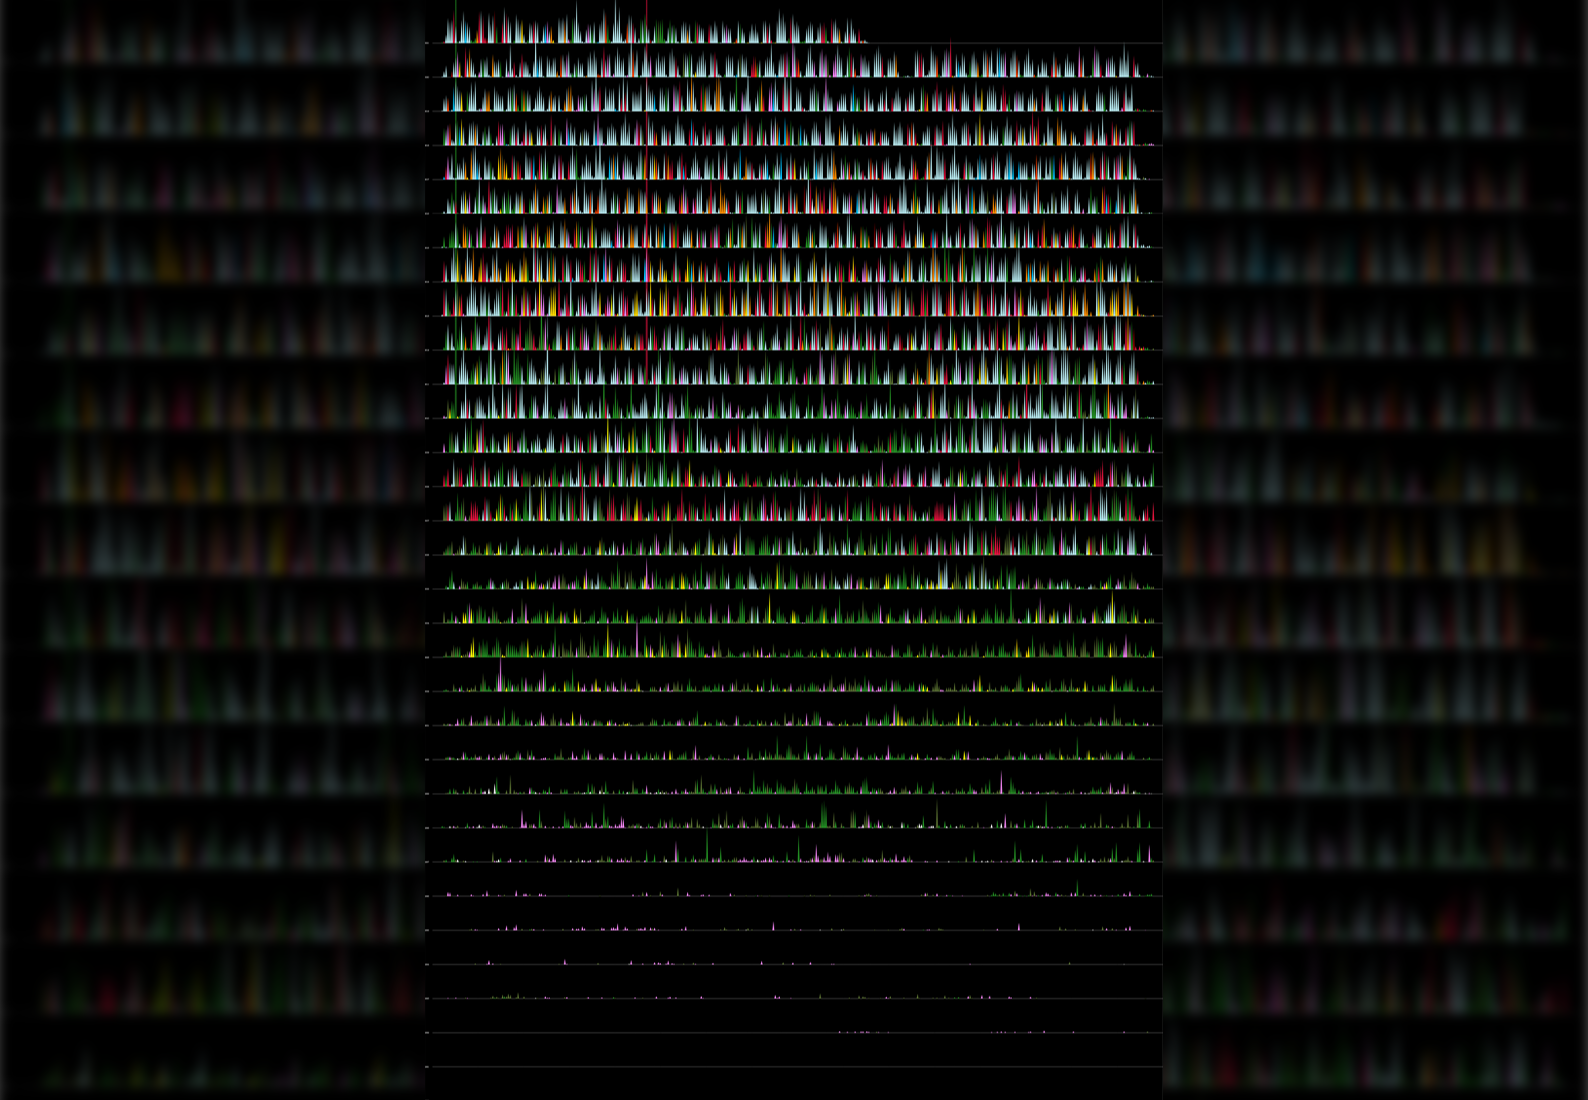 A piece of art showing computer data represented by a pattern of colorful dots.